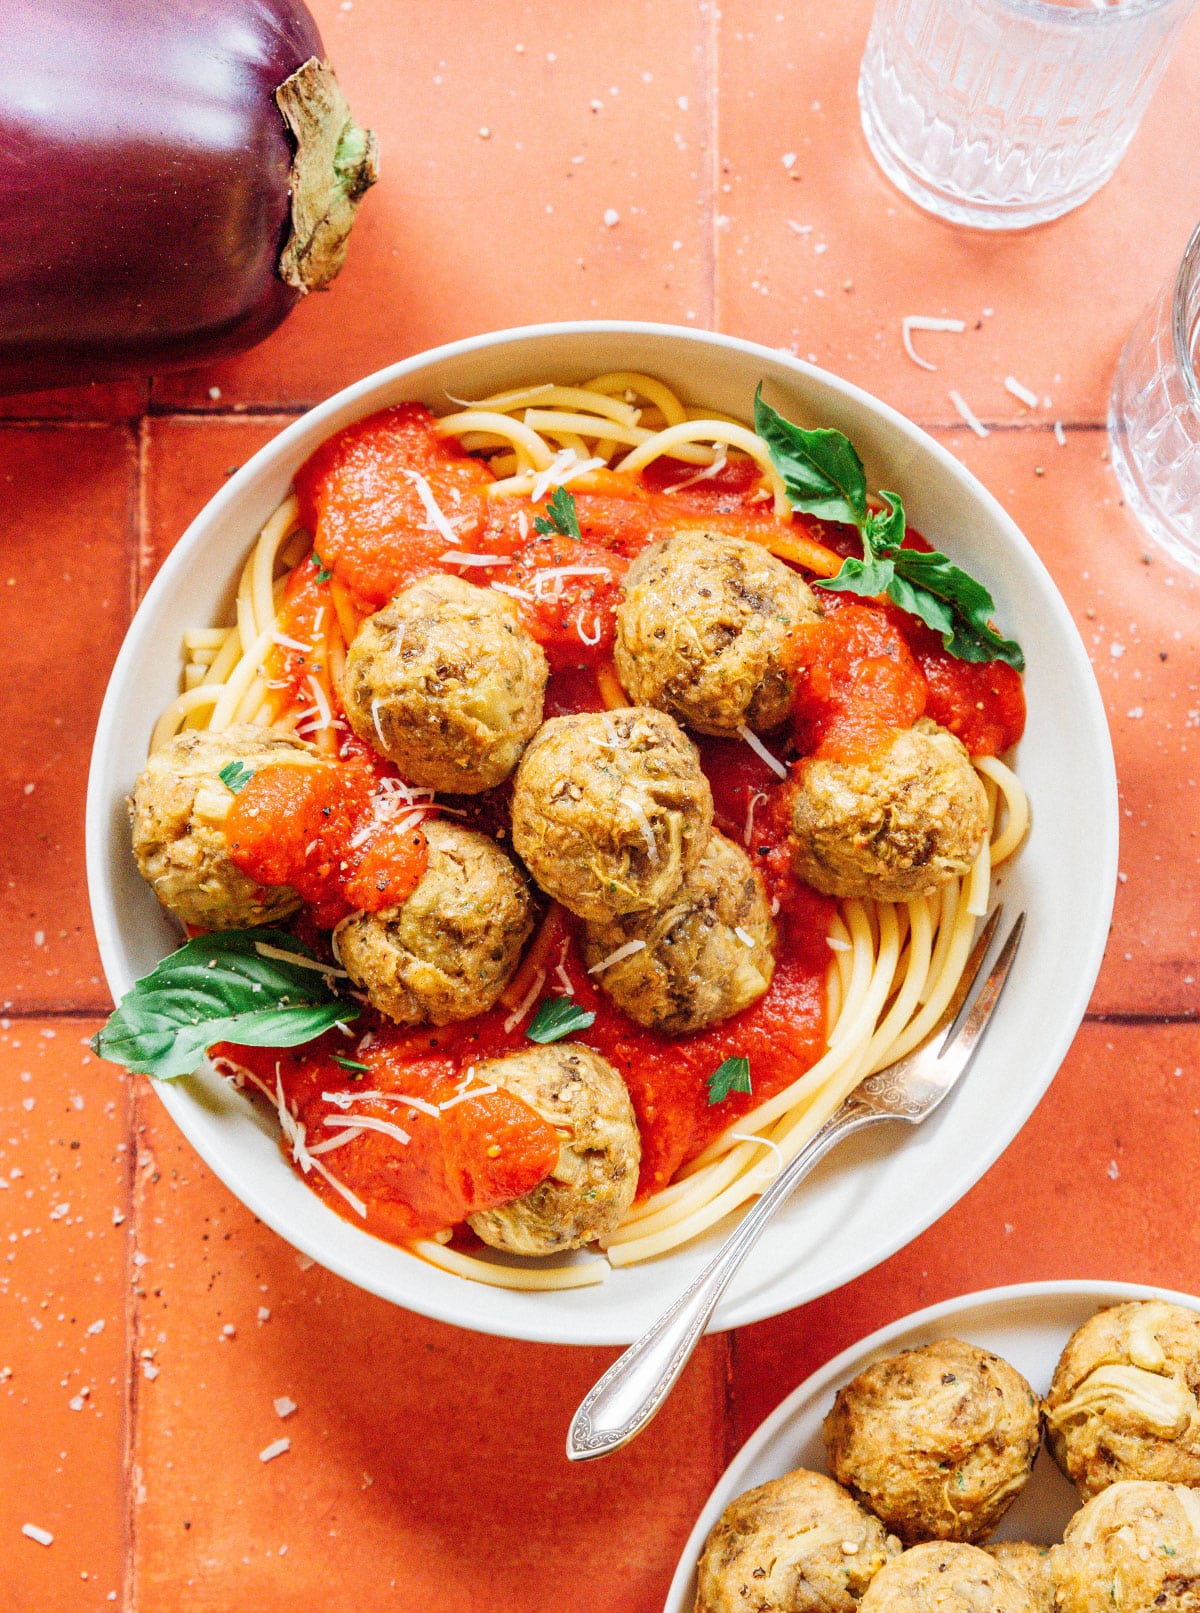 Large white bowl of spaghetti and red sauce topped with eggplant meatballs.